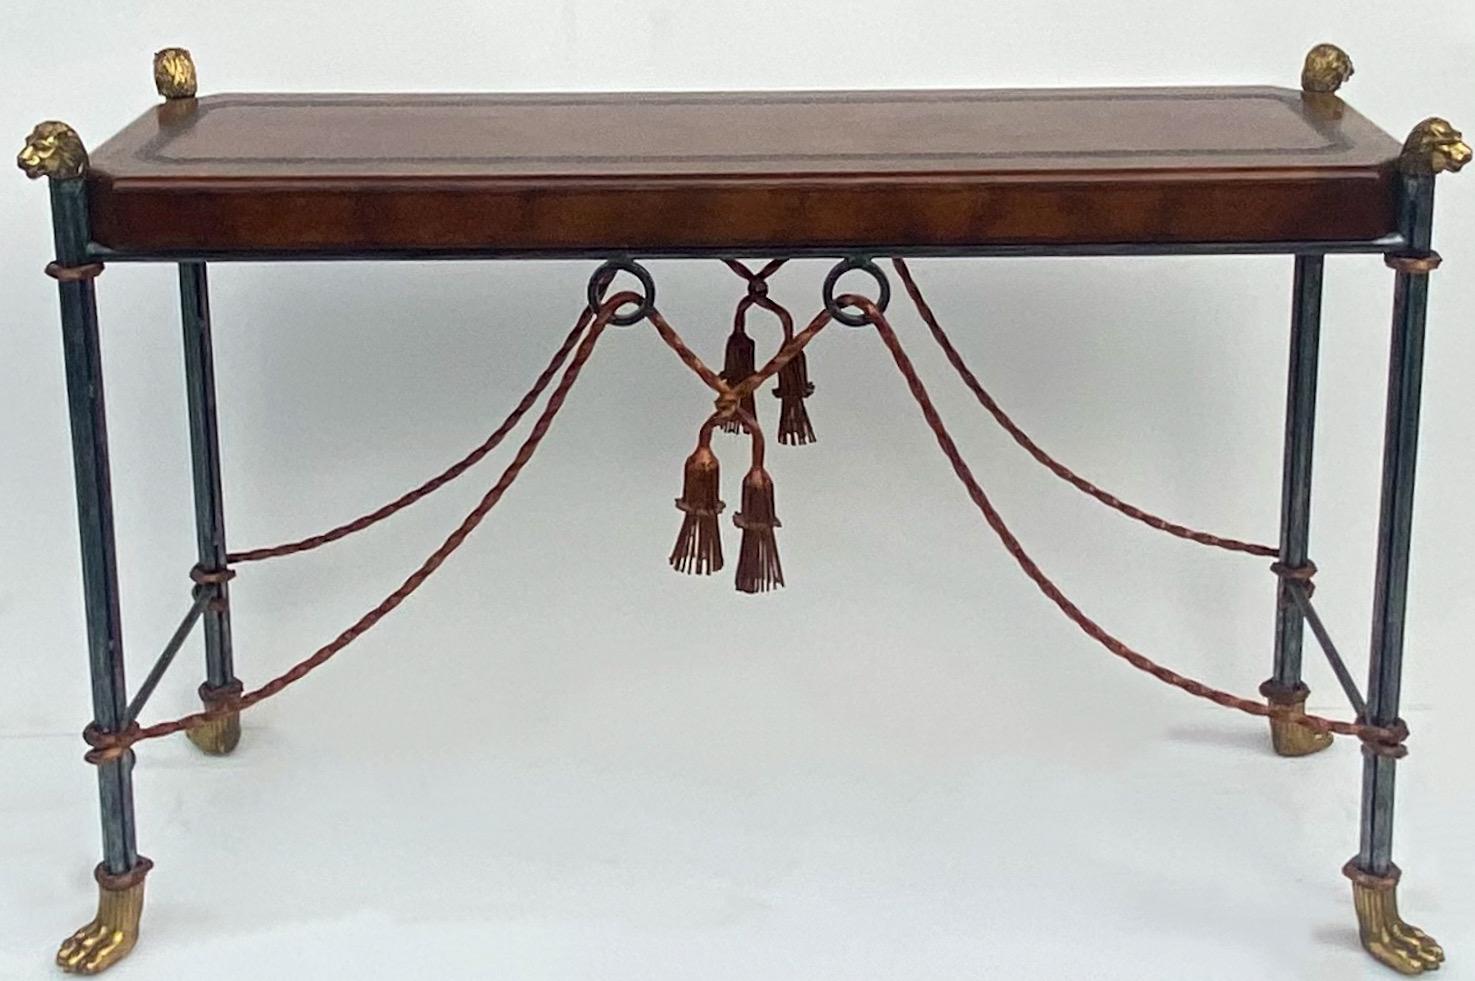 This is a late 20th century neoclassical style console table by Maitland-Smith. It has a tooled leather top and iron and brass base. The base has brass lion’s head and brass paws appointments. It is in very good condition.